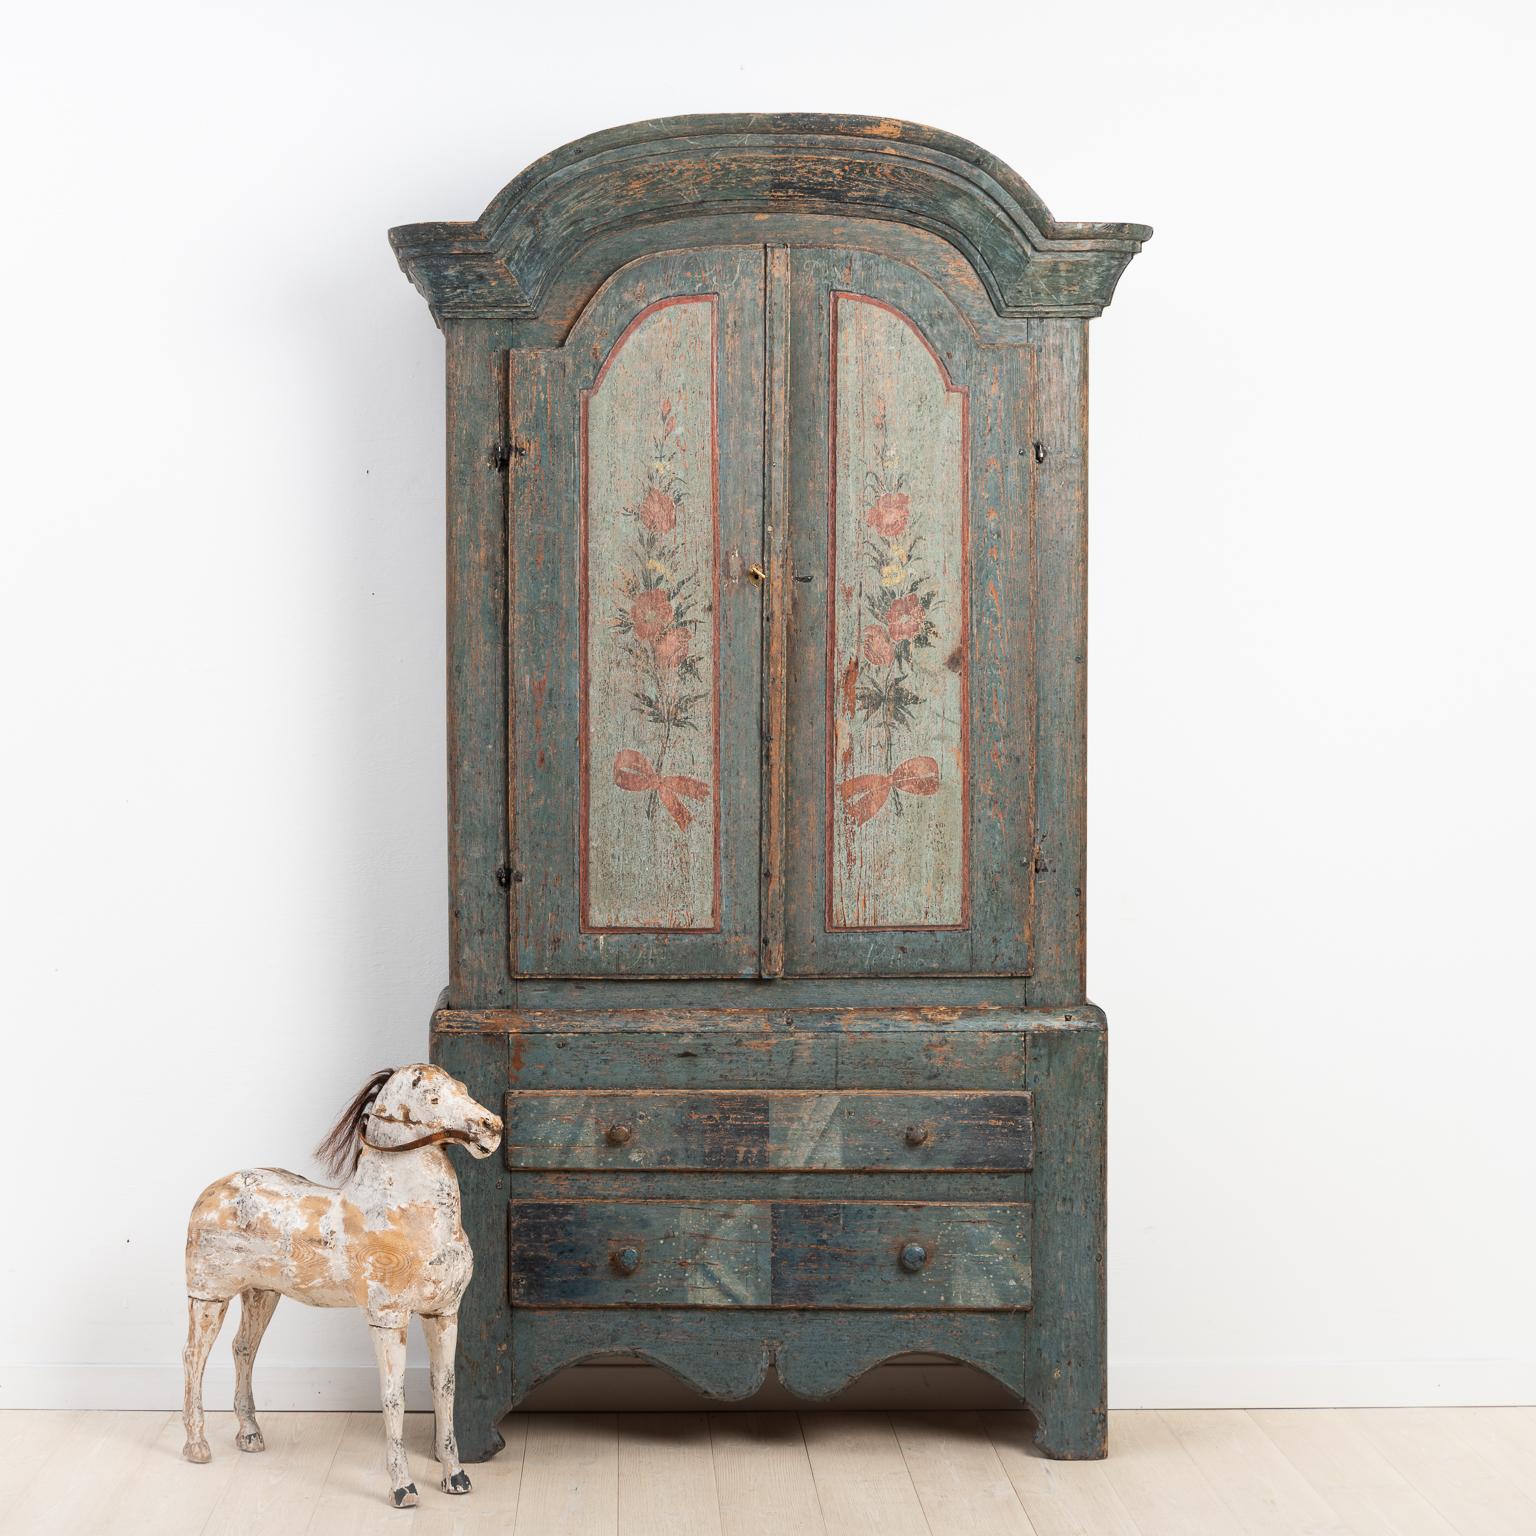 Rococo and Folk Art cabinet from Jämtland, northern Sweden. The cabinet has been scraped to the original paint. The original paint consists of marbled drawers and painted flowers on the doors. The paint on the inside is later, from around the